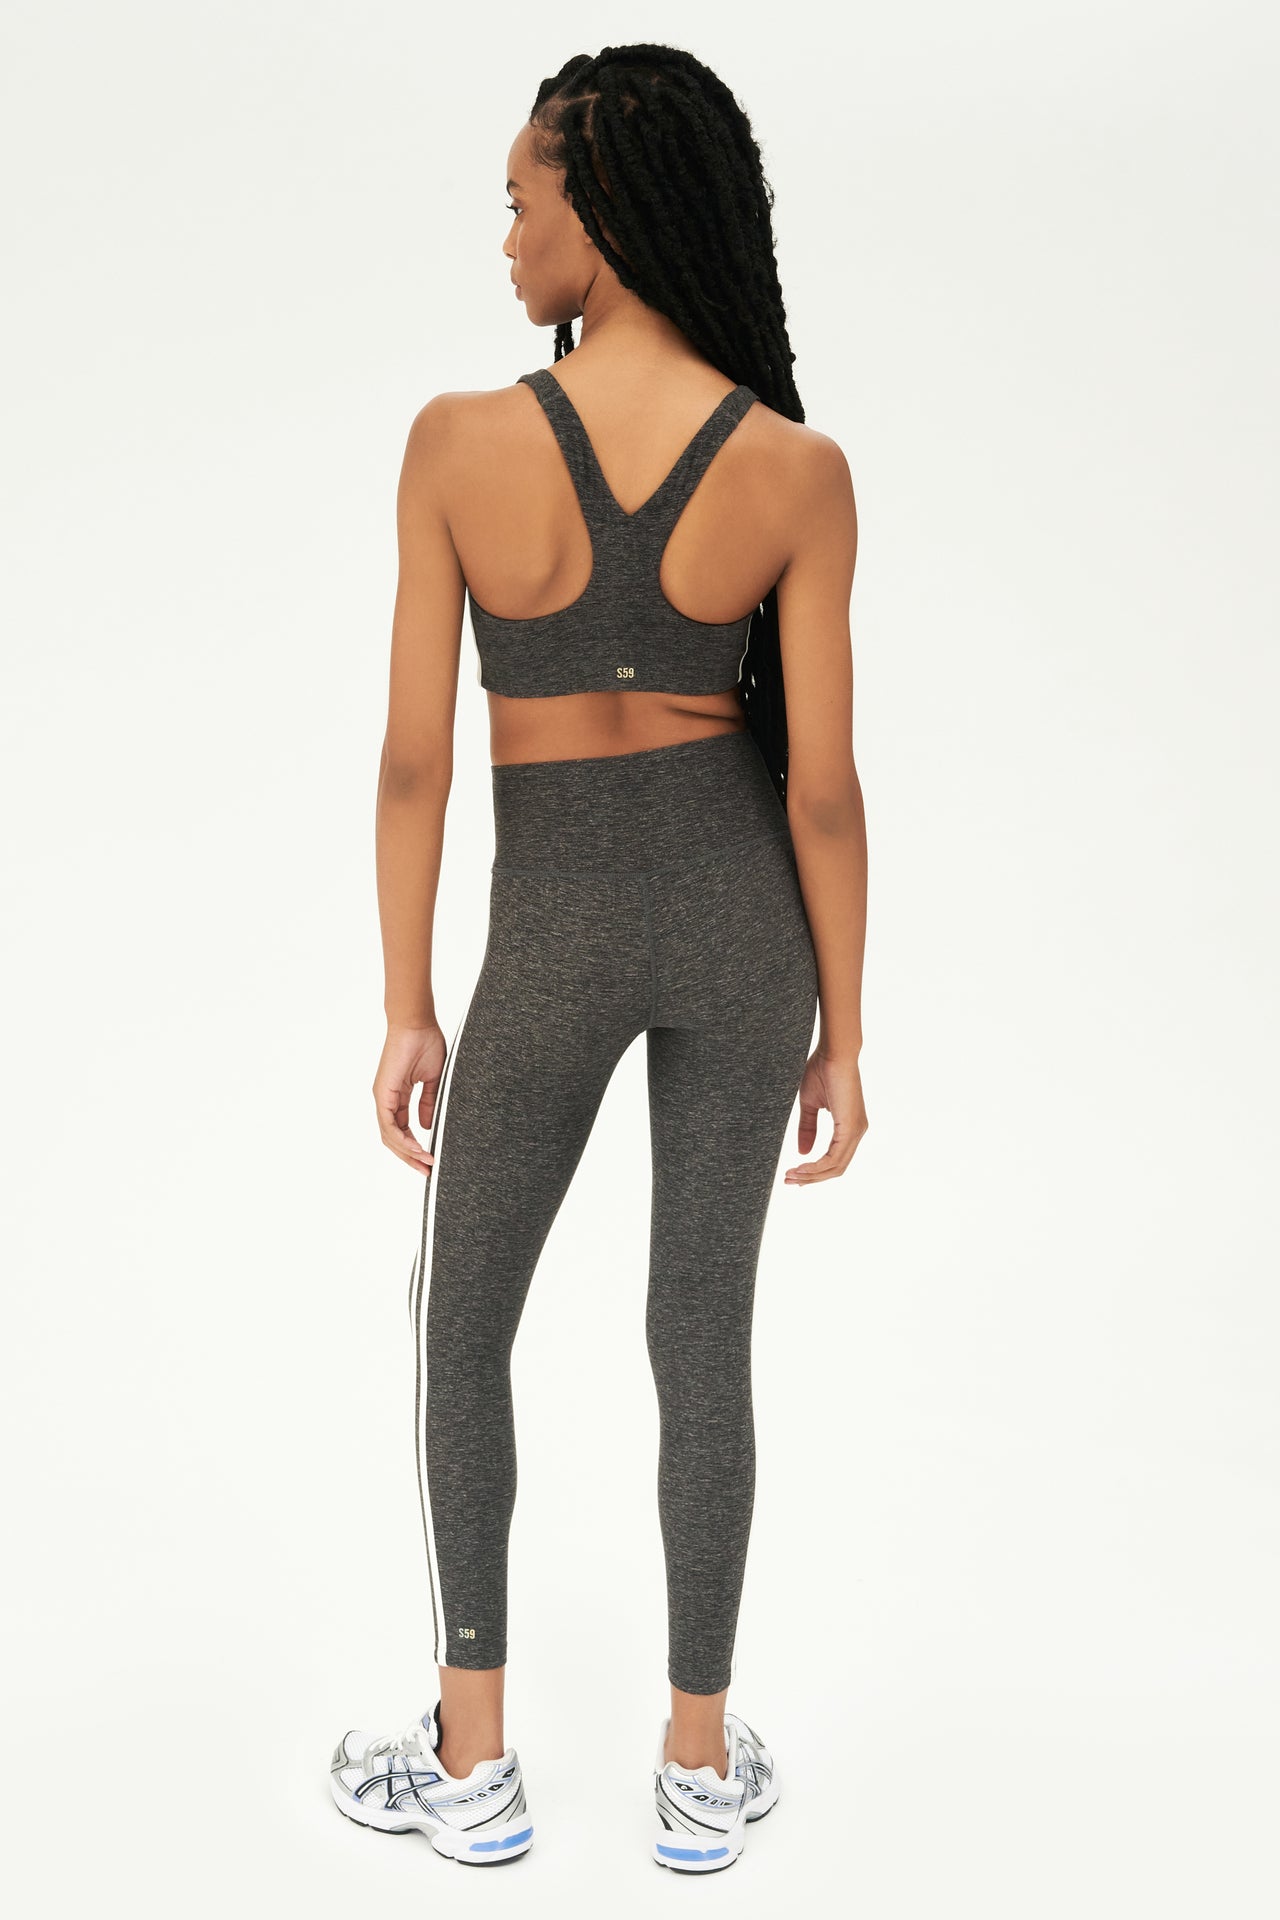 Full back view of girl wearing light dark grey sports bra with two thin white stripes down the side and light dark grey leggings with white shoes